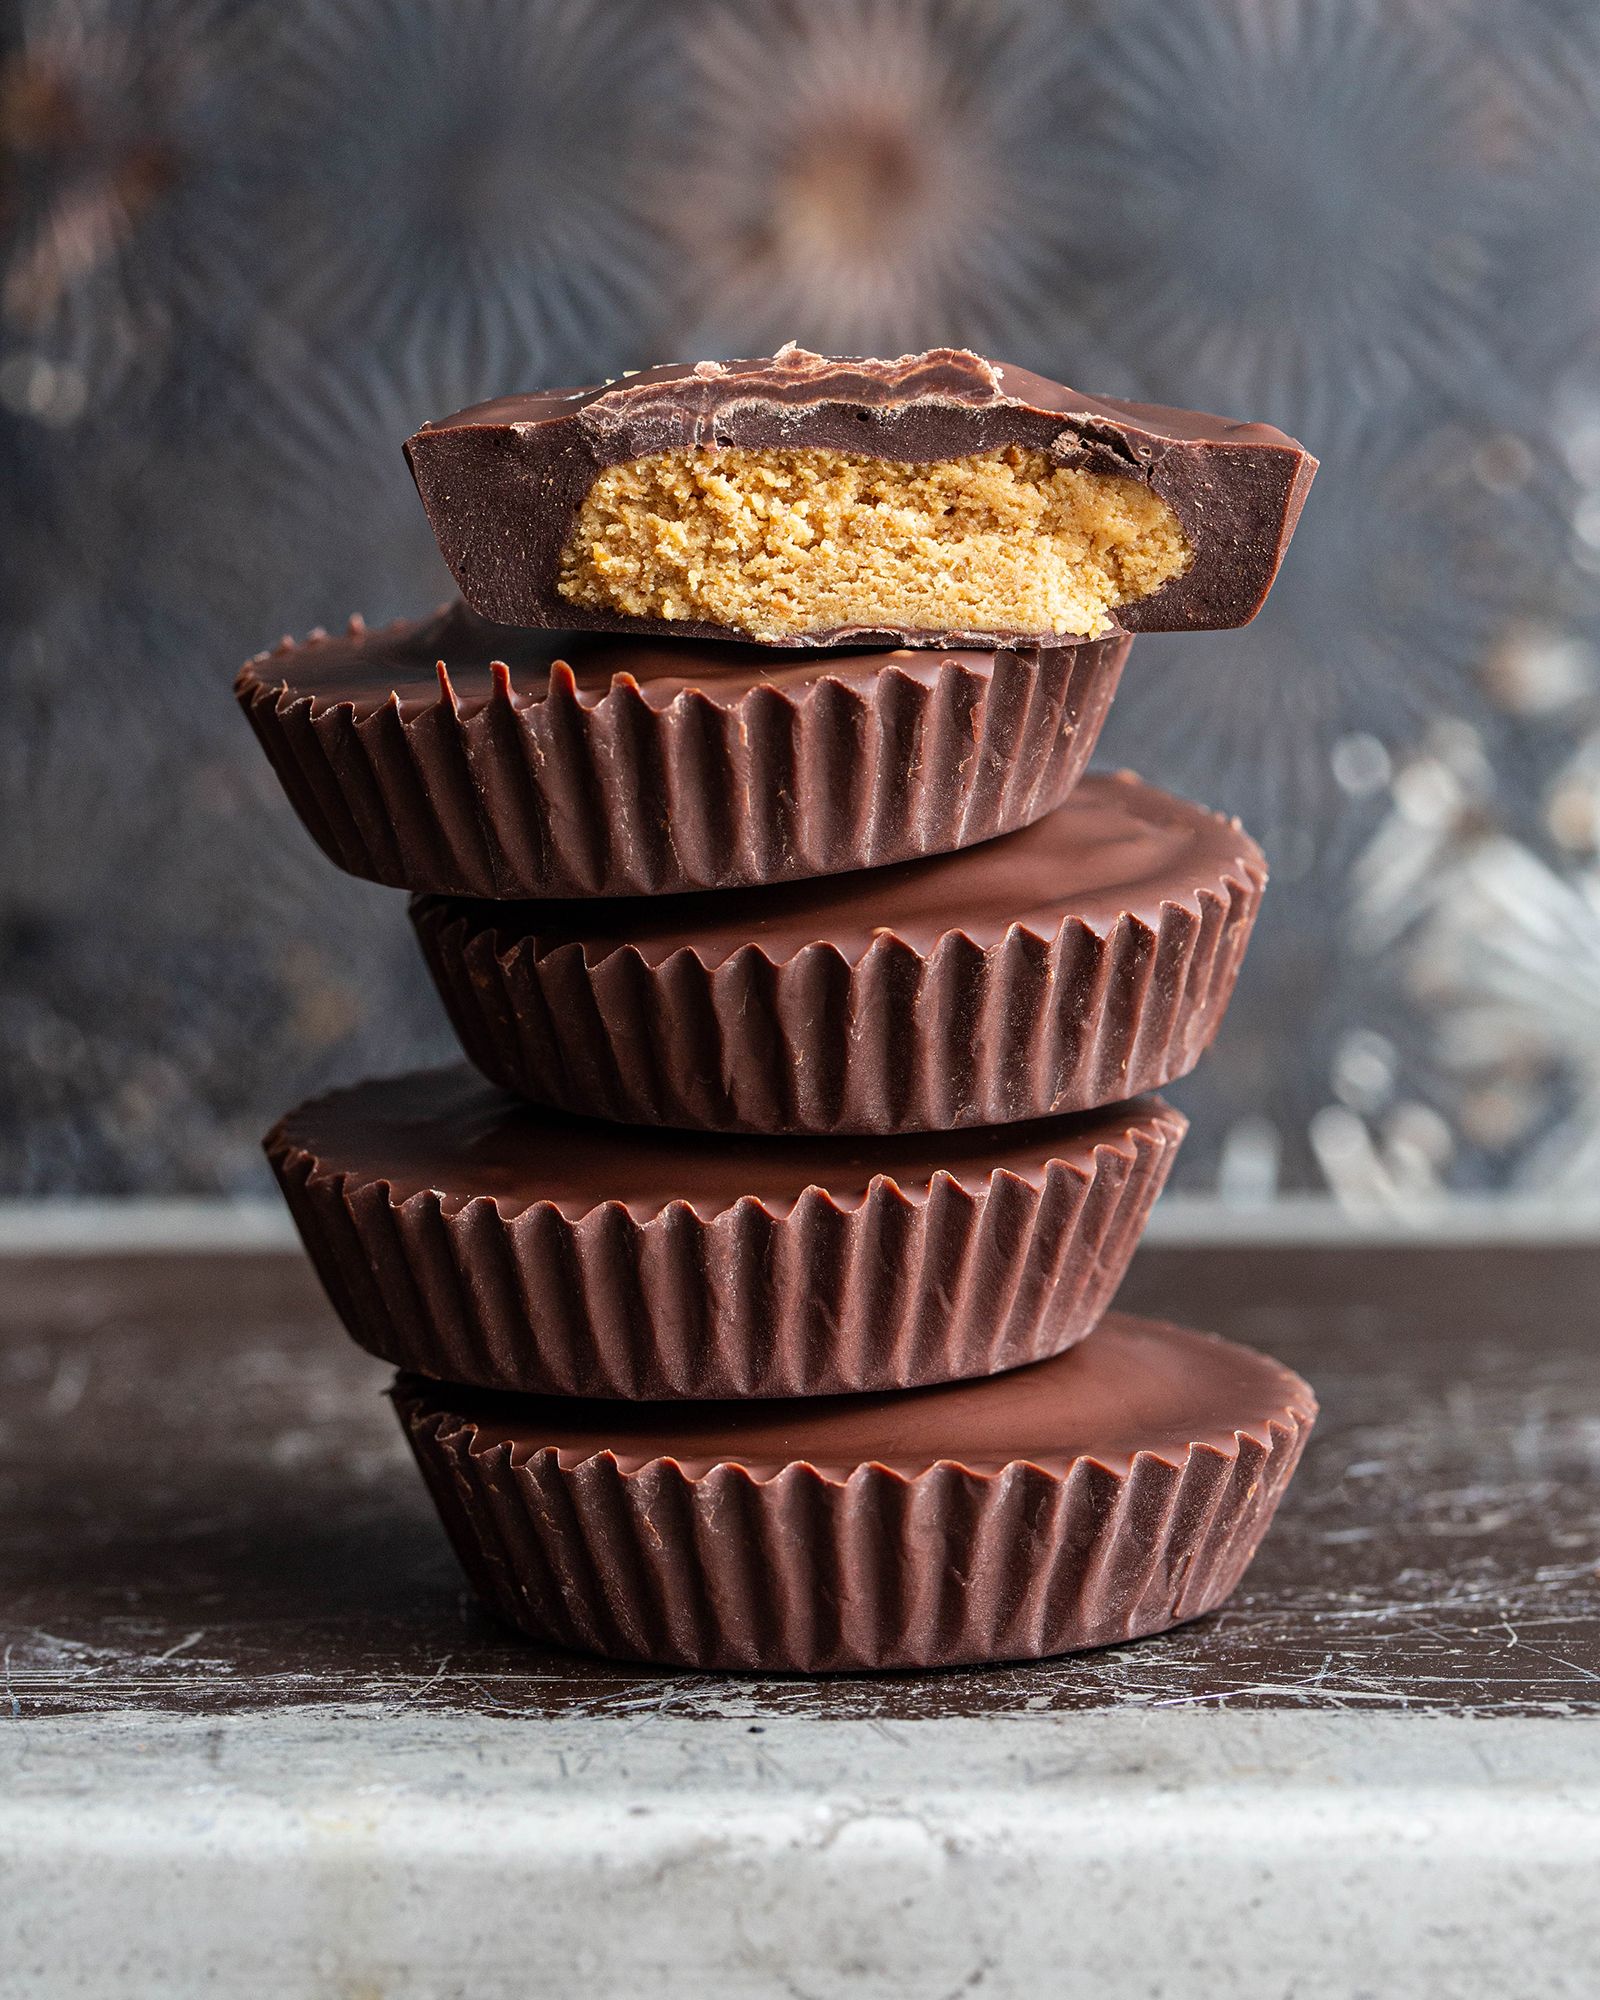 Reese's Peanut Butter Cups Wallpapers - Wallpaper Cave